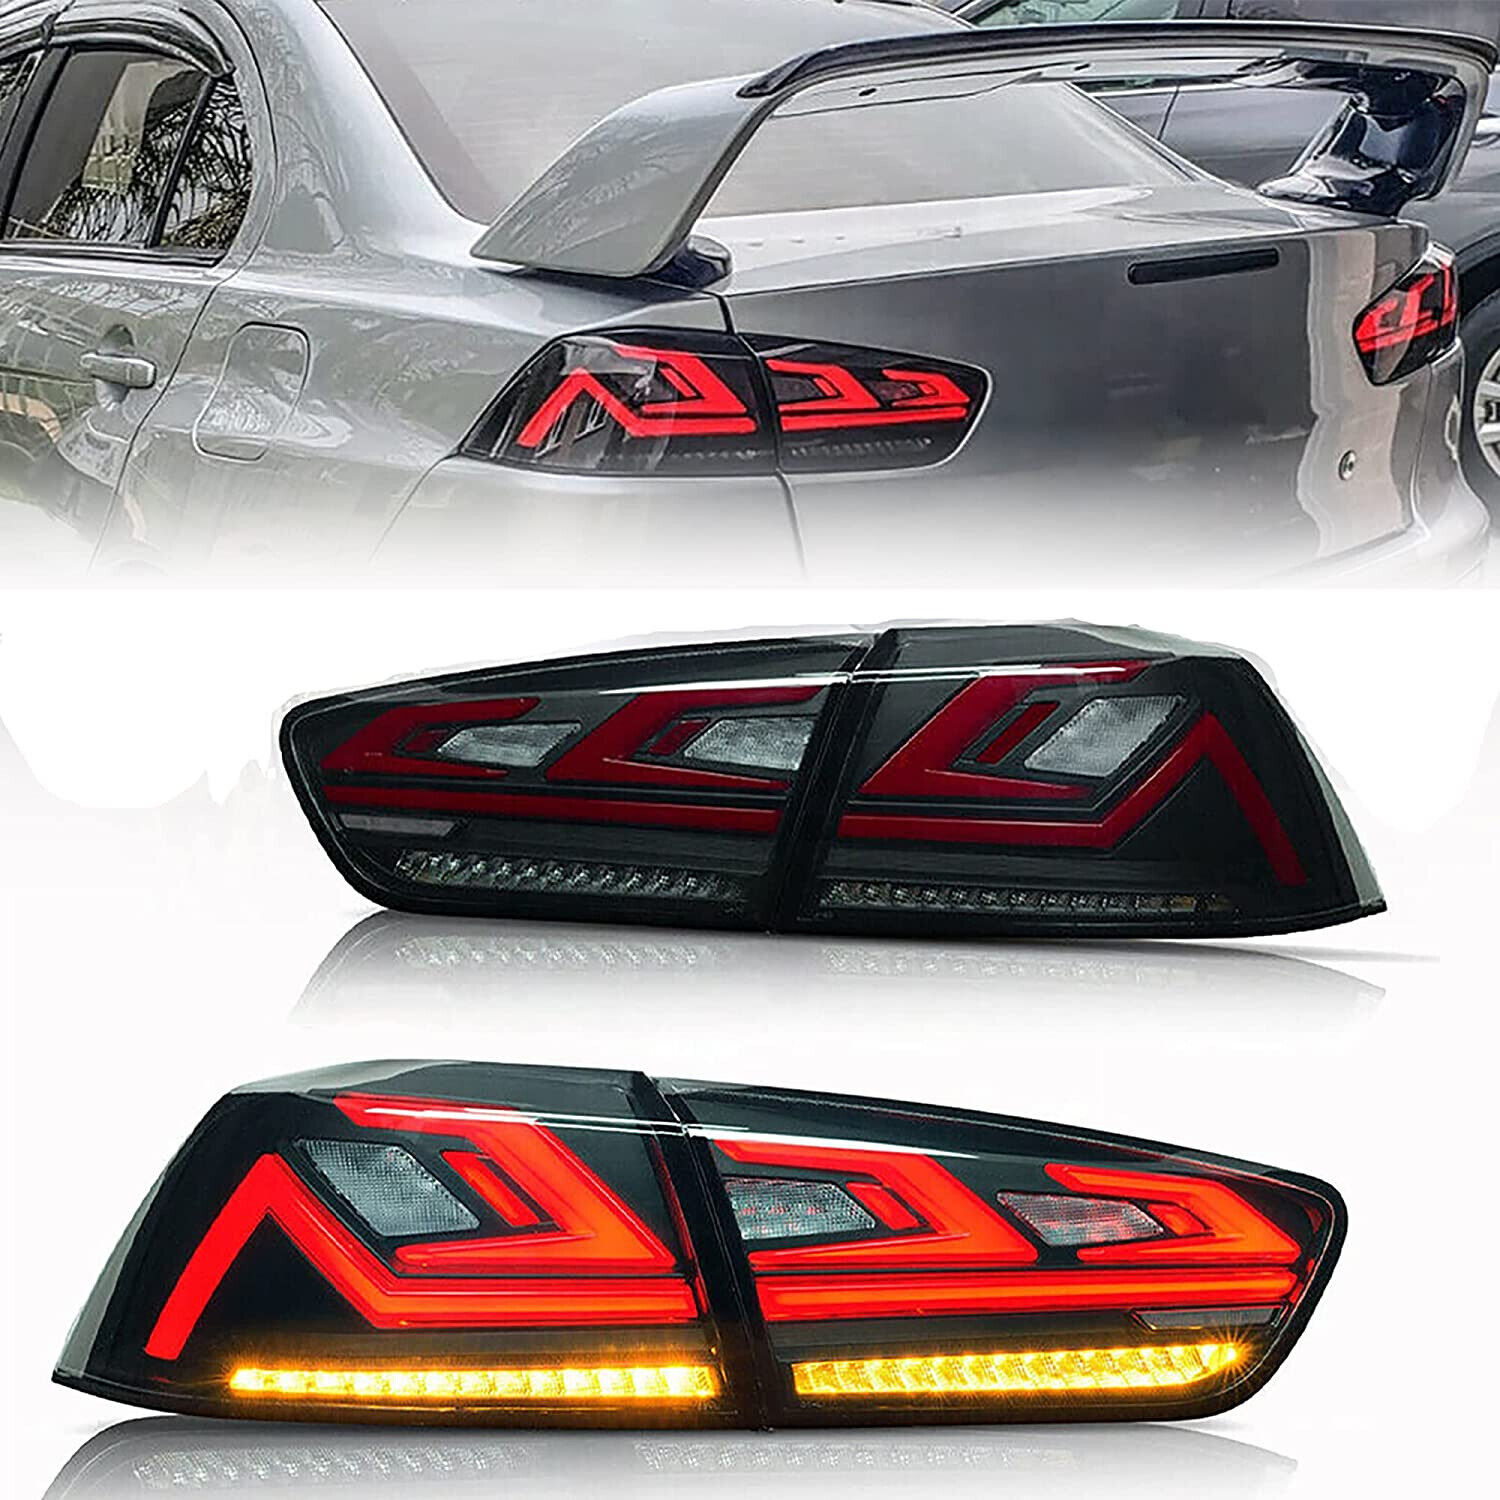 Pair Smoked LED Tail lights Rear Lamps For 2008-2017 Mitsubishi Lancer EVO X EX